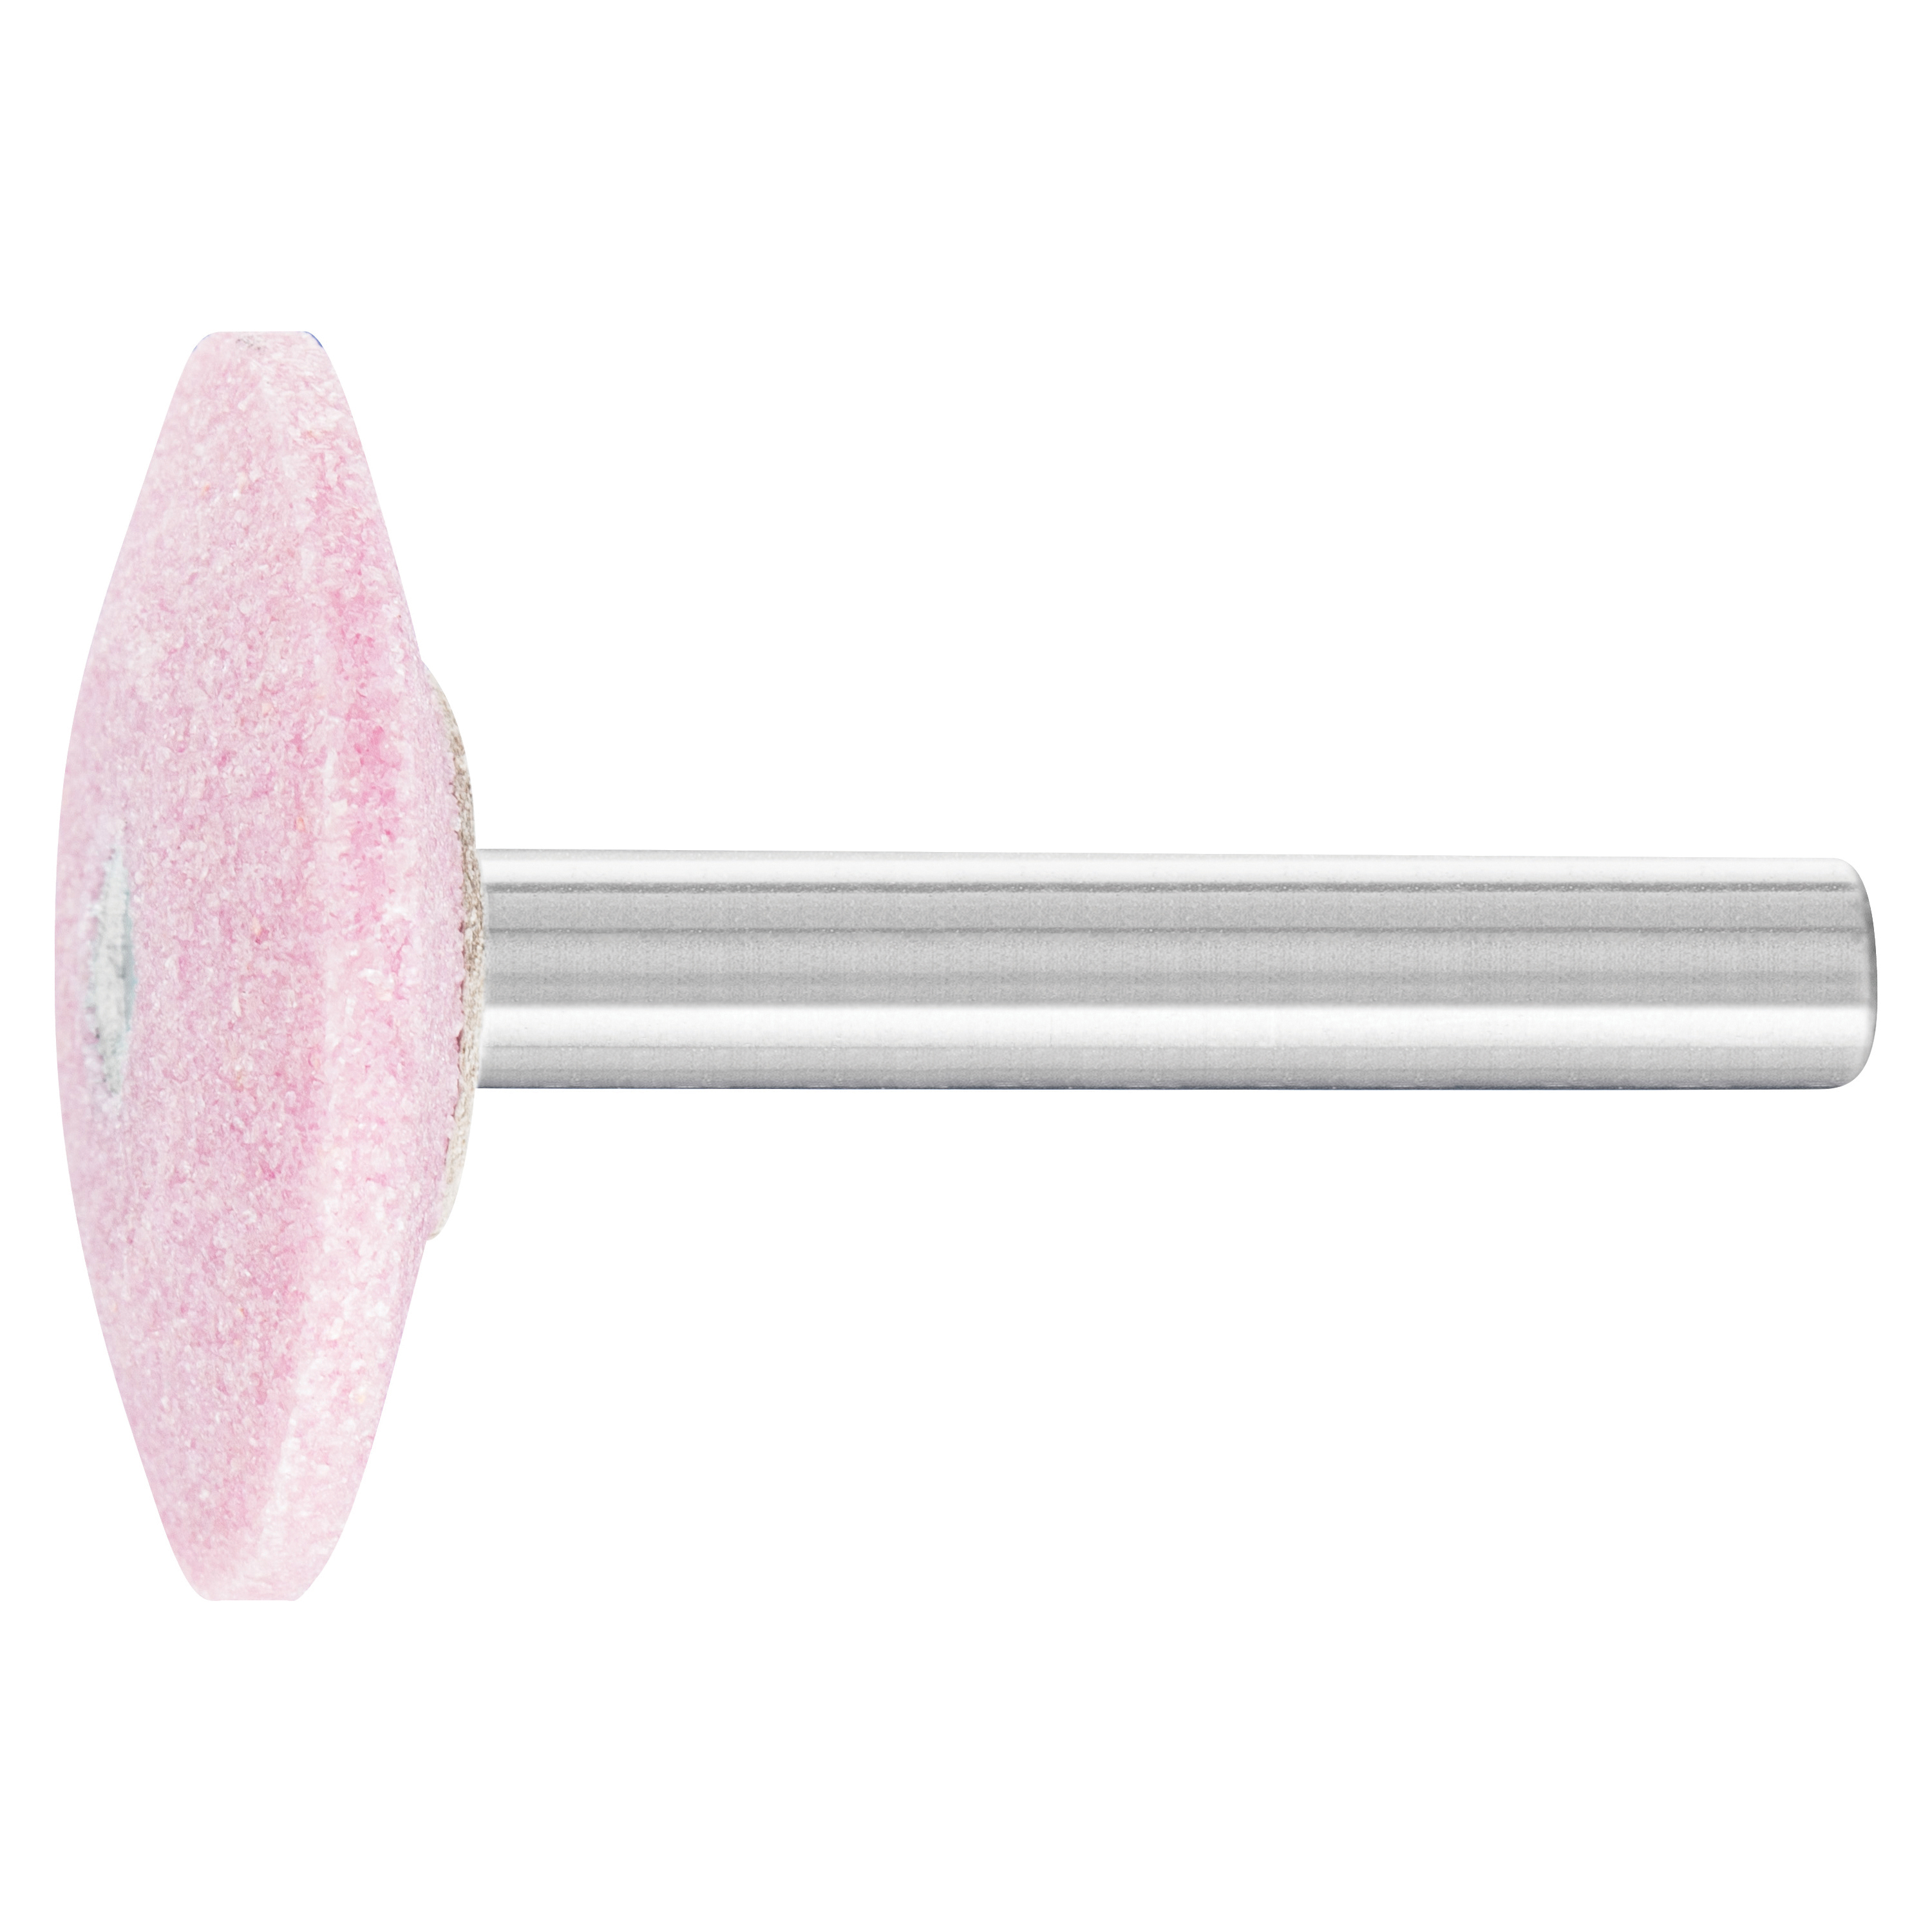 PFERD 31234 A Series Mounted Point, A37 Point, 1-1/4 in Dia x 1/4 in L Head, 1/4 in Dia Shank